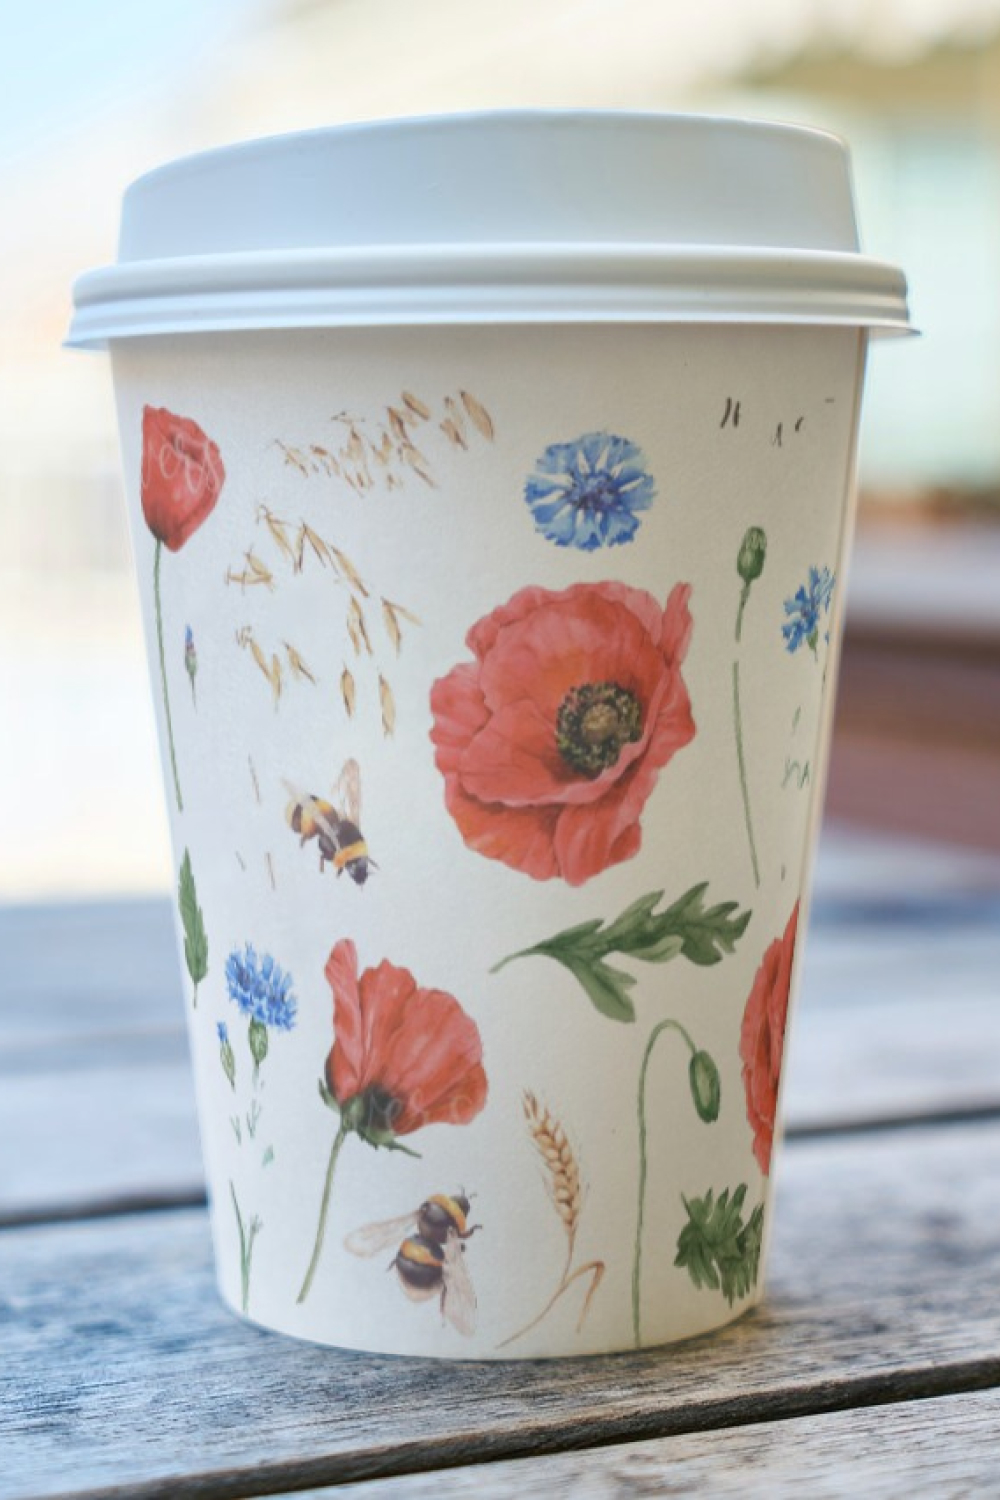 Cup of Coffee with Image with Watercolor Poppies and Bee.